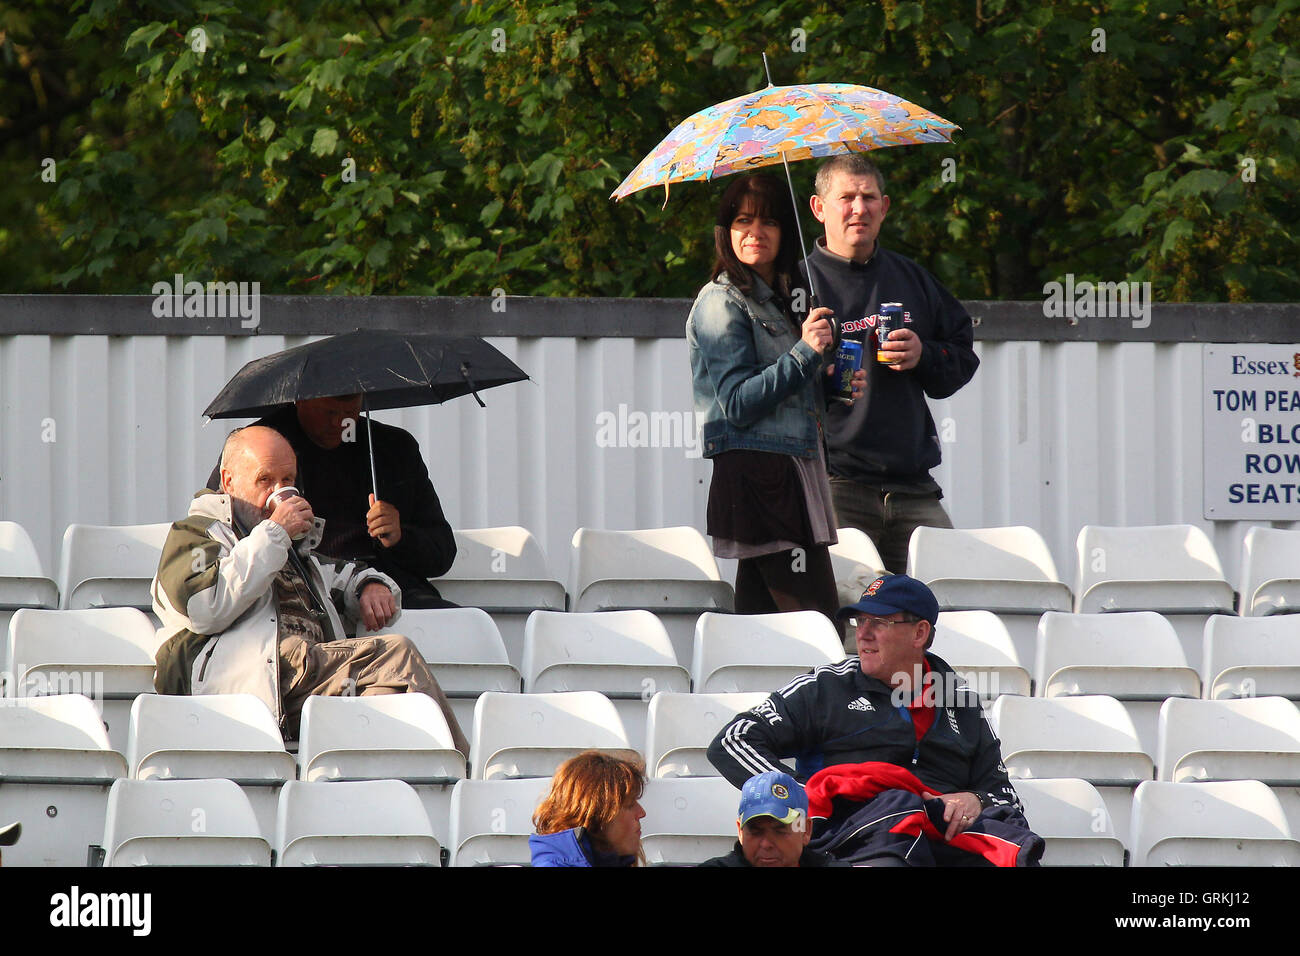 Umbrellas up around the ground as rain falls again - Essex Eagles vs Sri Lanka - 50-over Tour Match at the Essex County Ground, Chelmsford - 13/05/14 Stock Photo